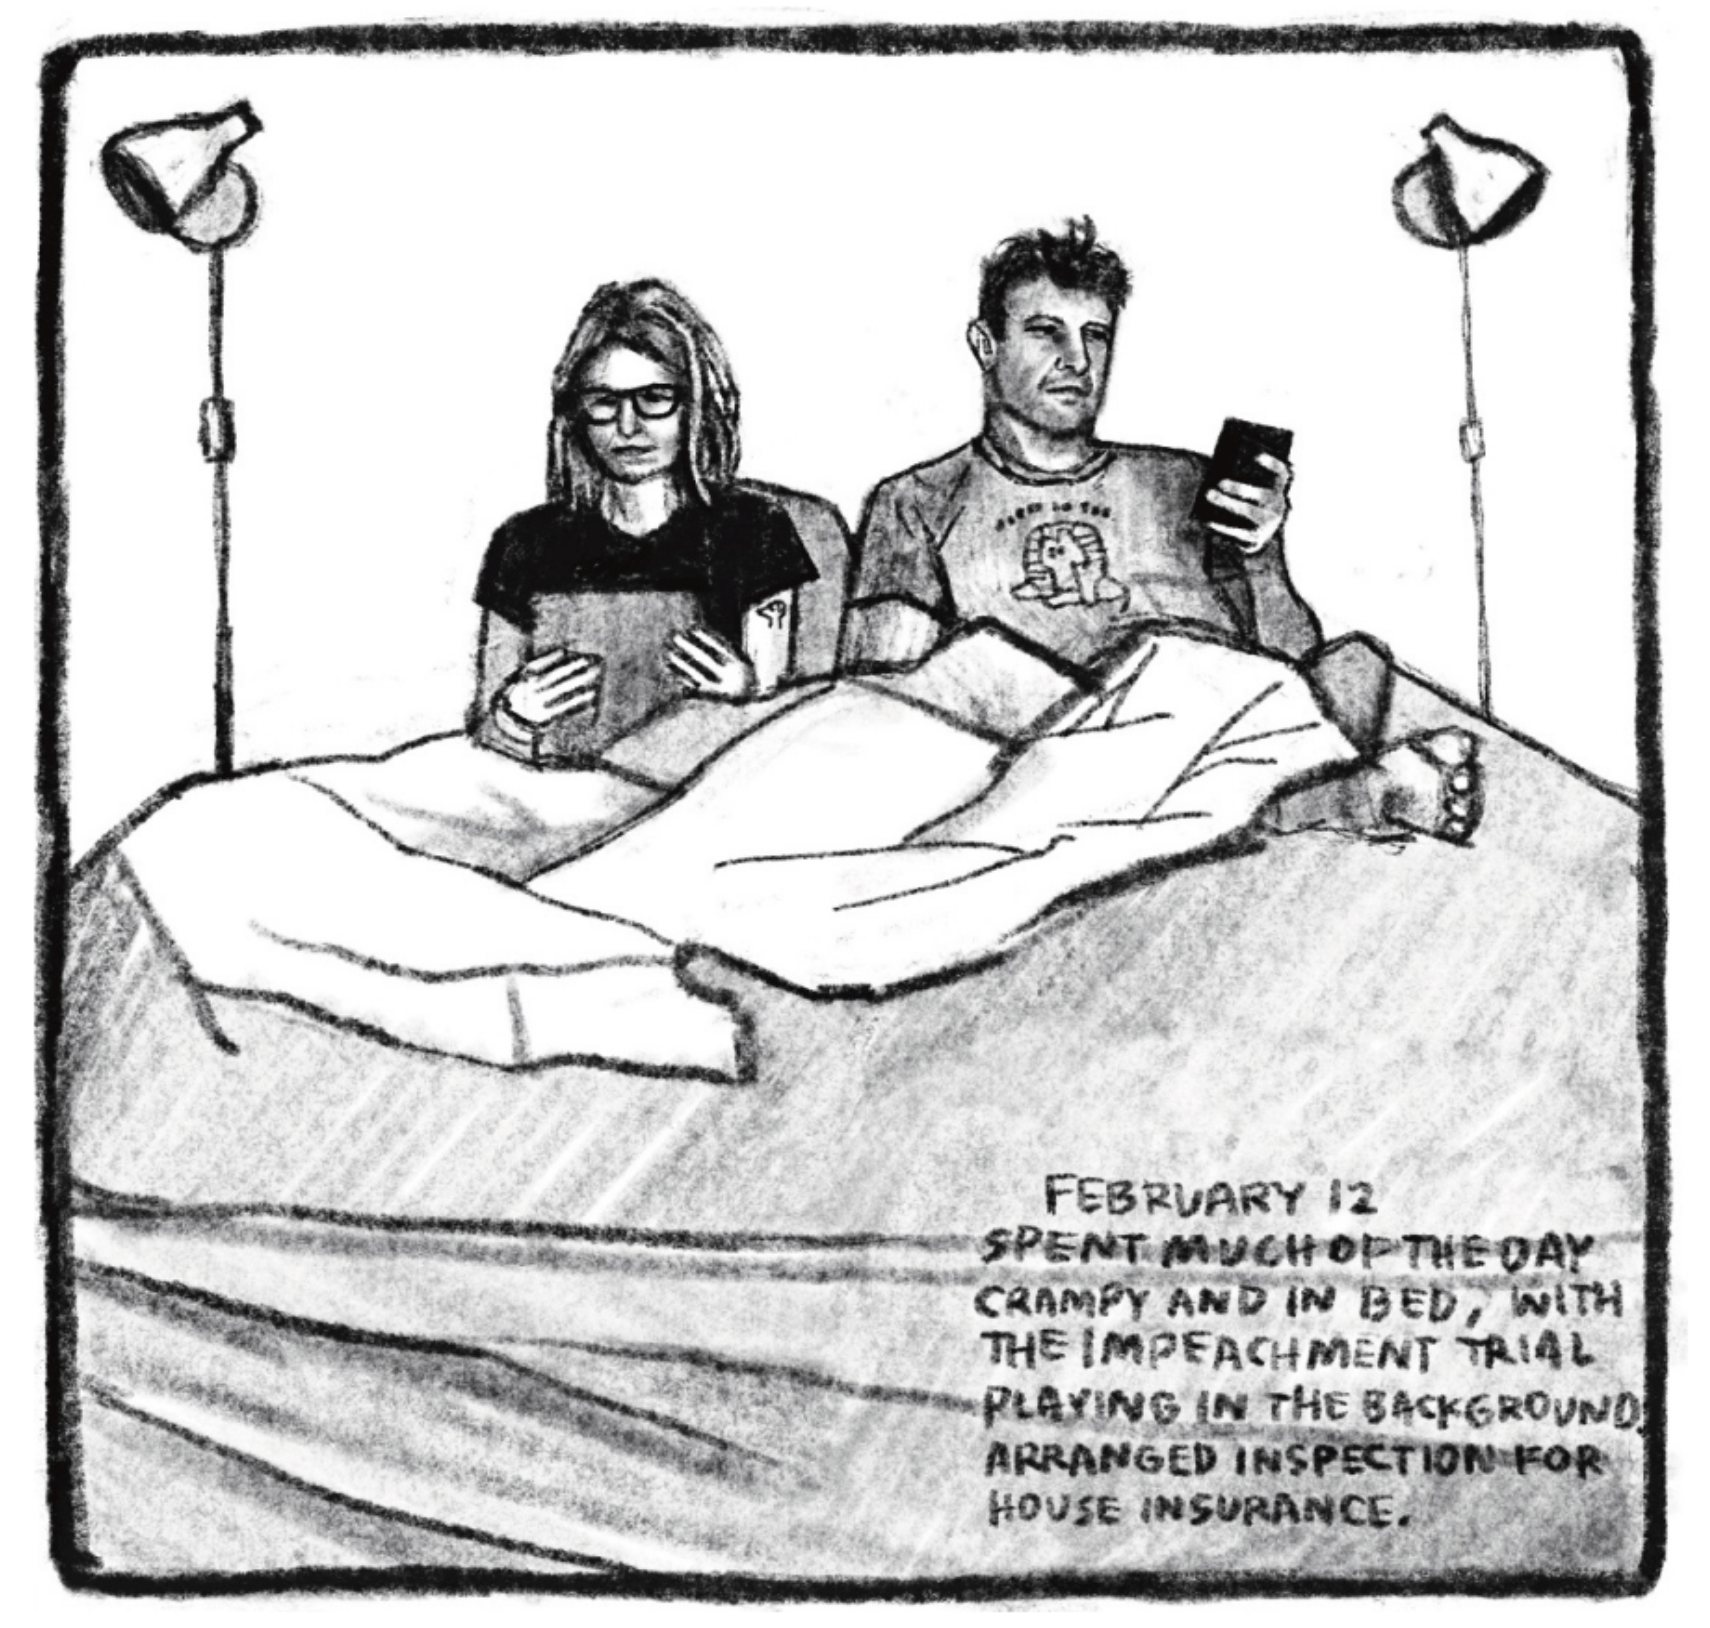 Hold Still Episode 8, Panel 2
"FEBRUARY 12
SPENT MUCH OF THE DAY CRAMPY AND IN BED, WITH THE IMPEACHMENT TRIAL PLAYING IN THE BACKGROUND. ARRANGED INSPECTION FOR HOUSE INSURANCE."
Drawing of Kim reading a book in bed, next to Tony, who is using his phone. 